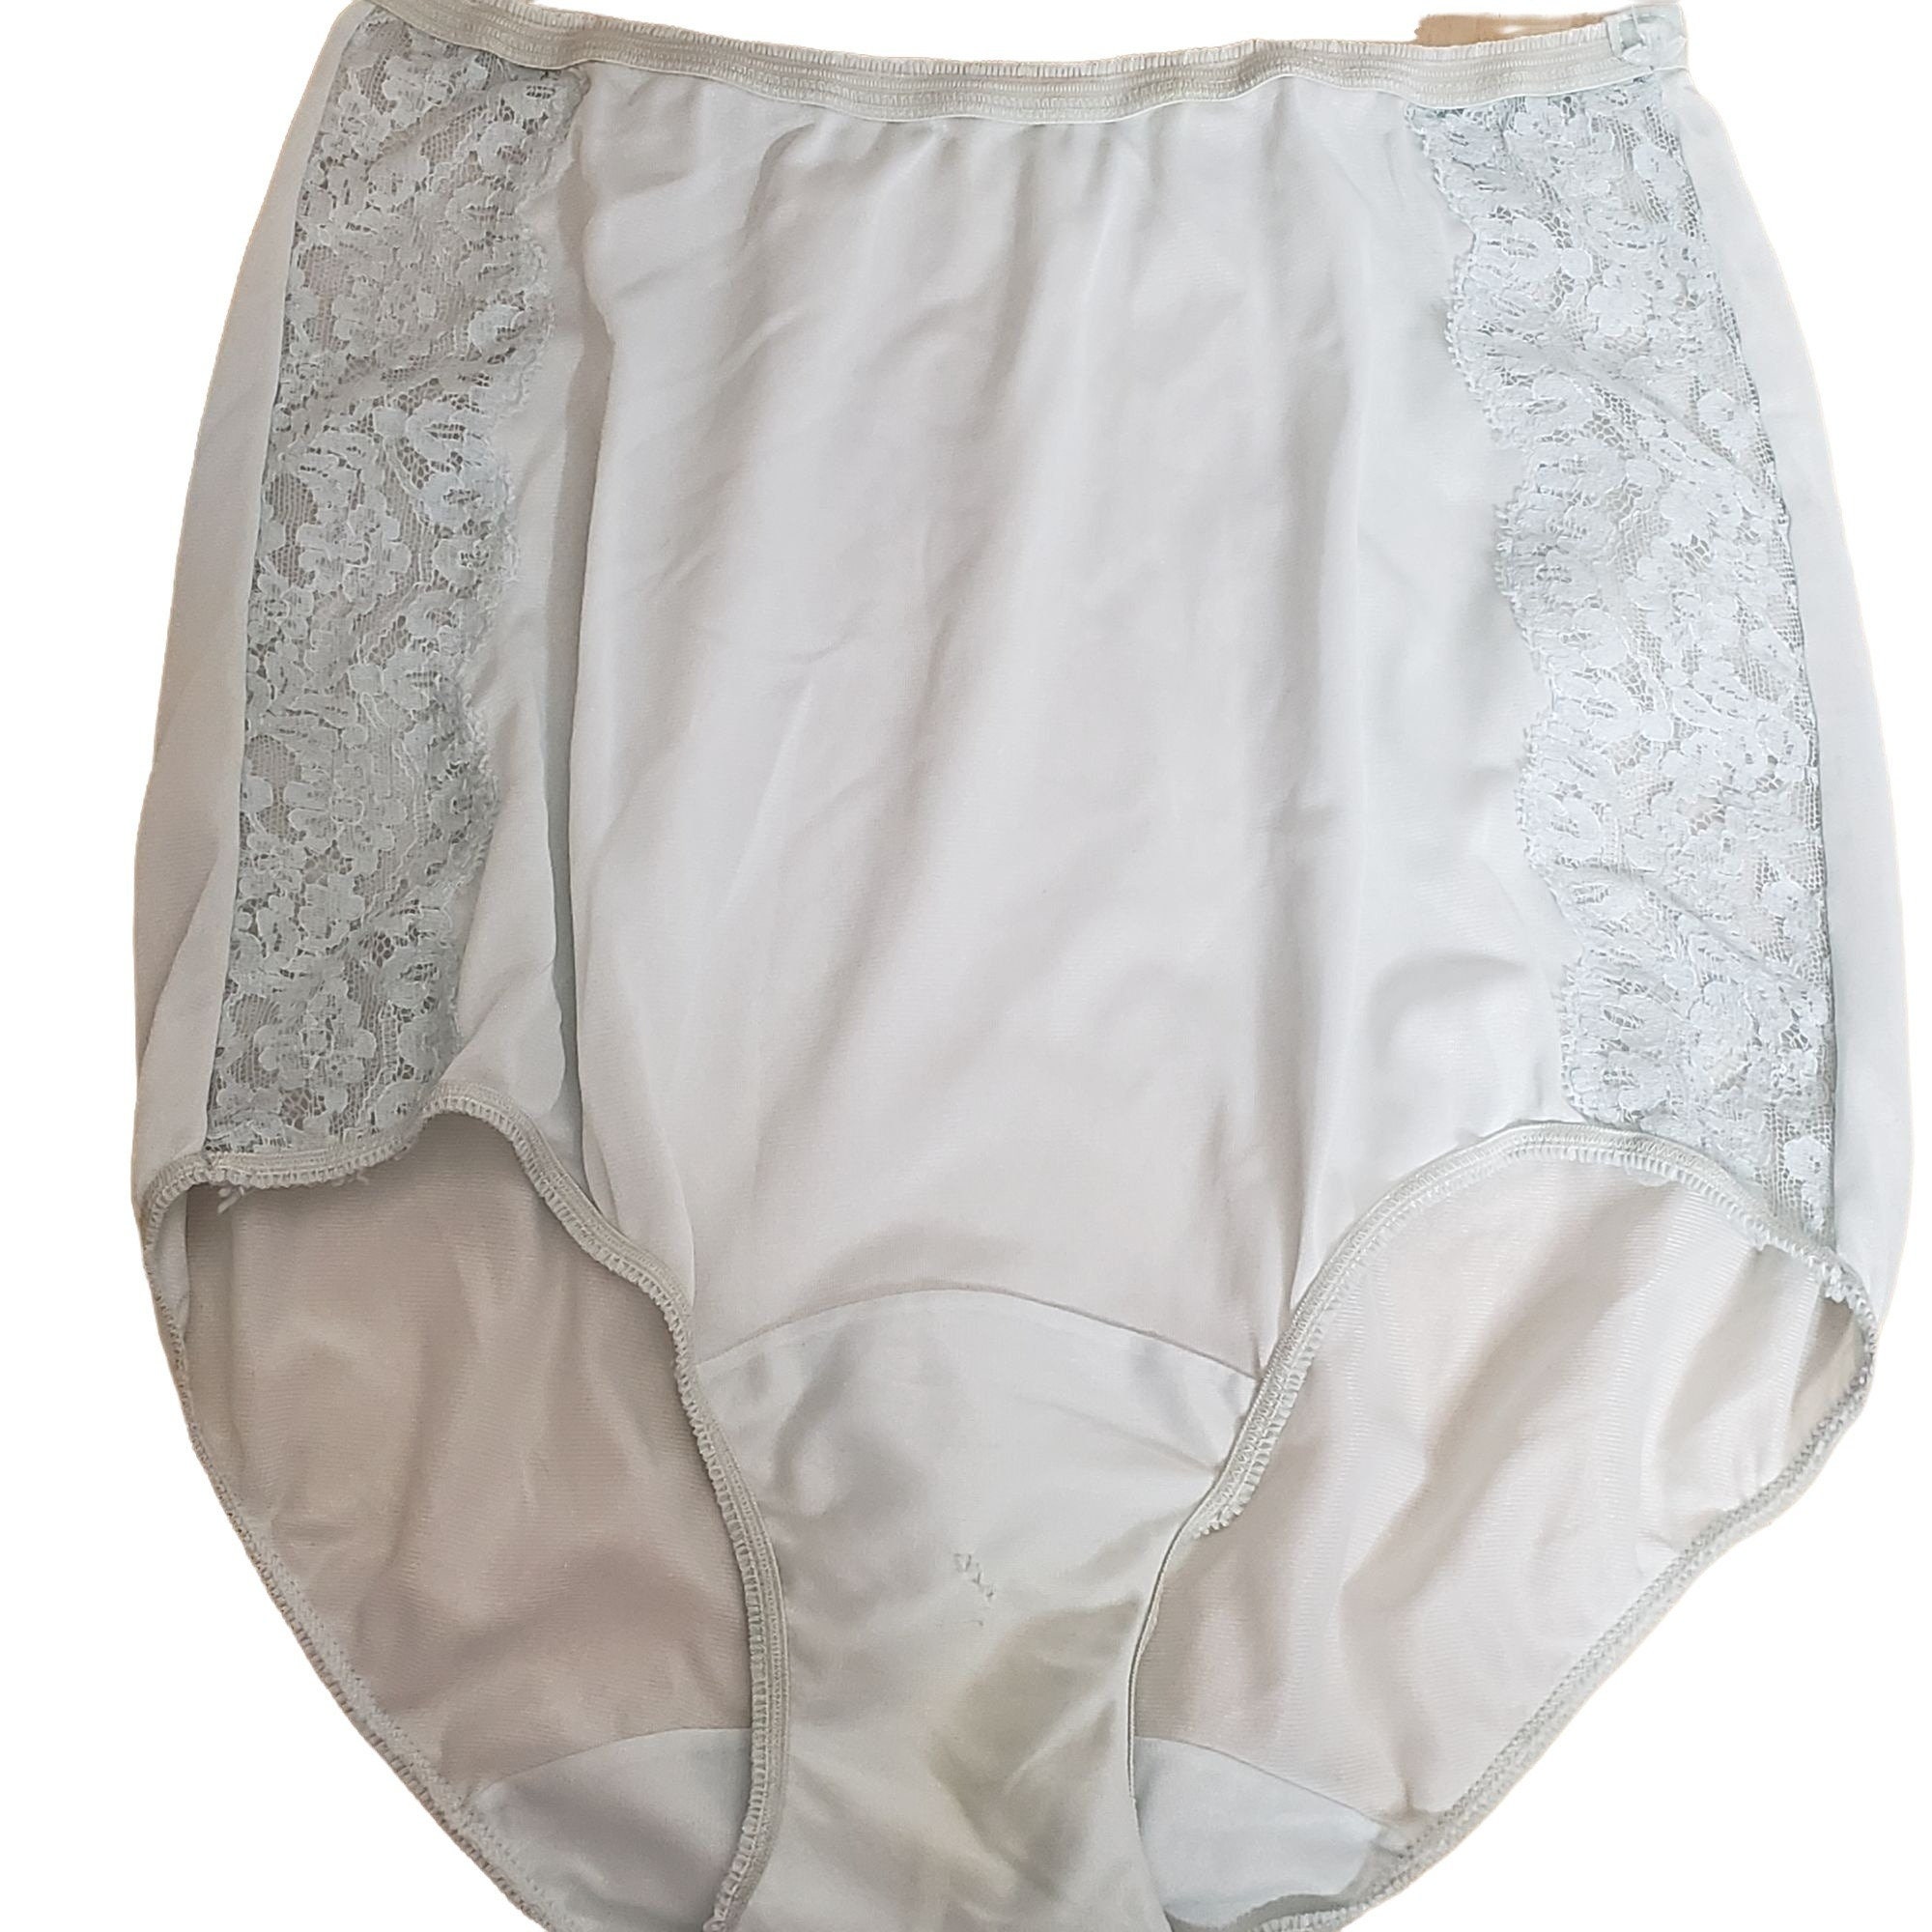 Vintage Granny Sissy Full Cut Nylon Panties by Lovepats Silky Soft, size 9